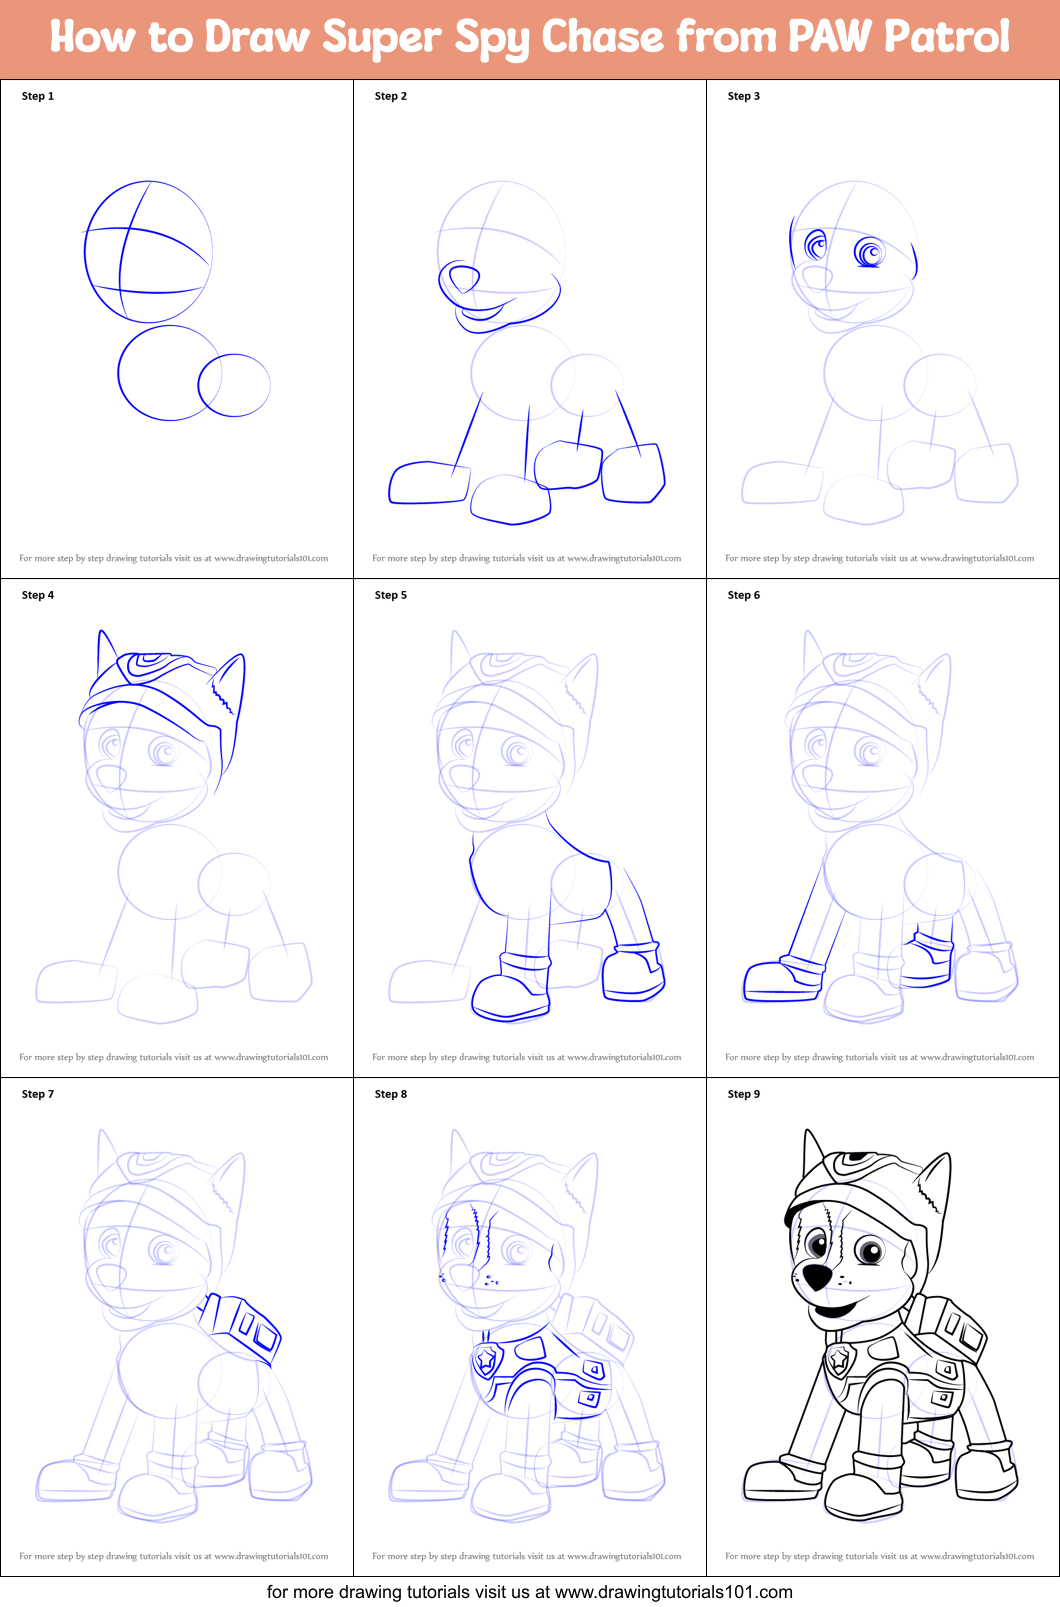 How to Draw Super Spy Chase from PAW Patrol printable step by step